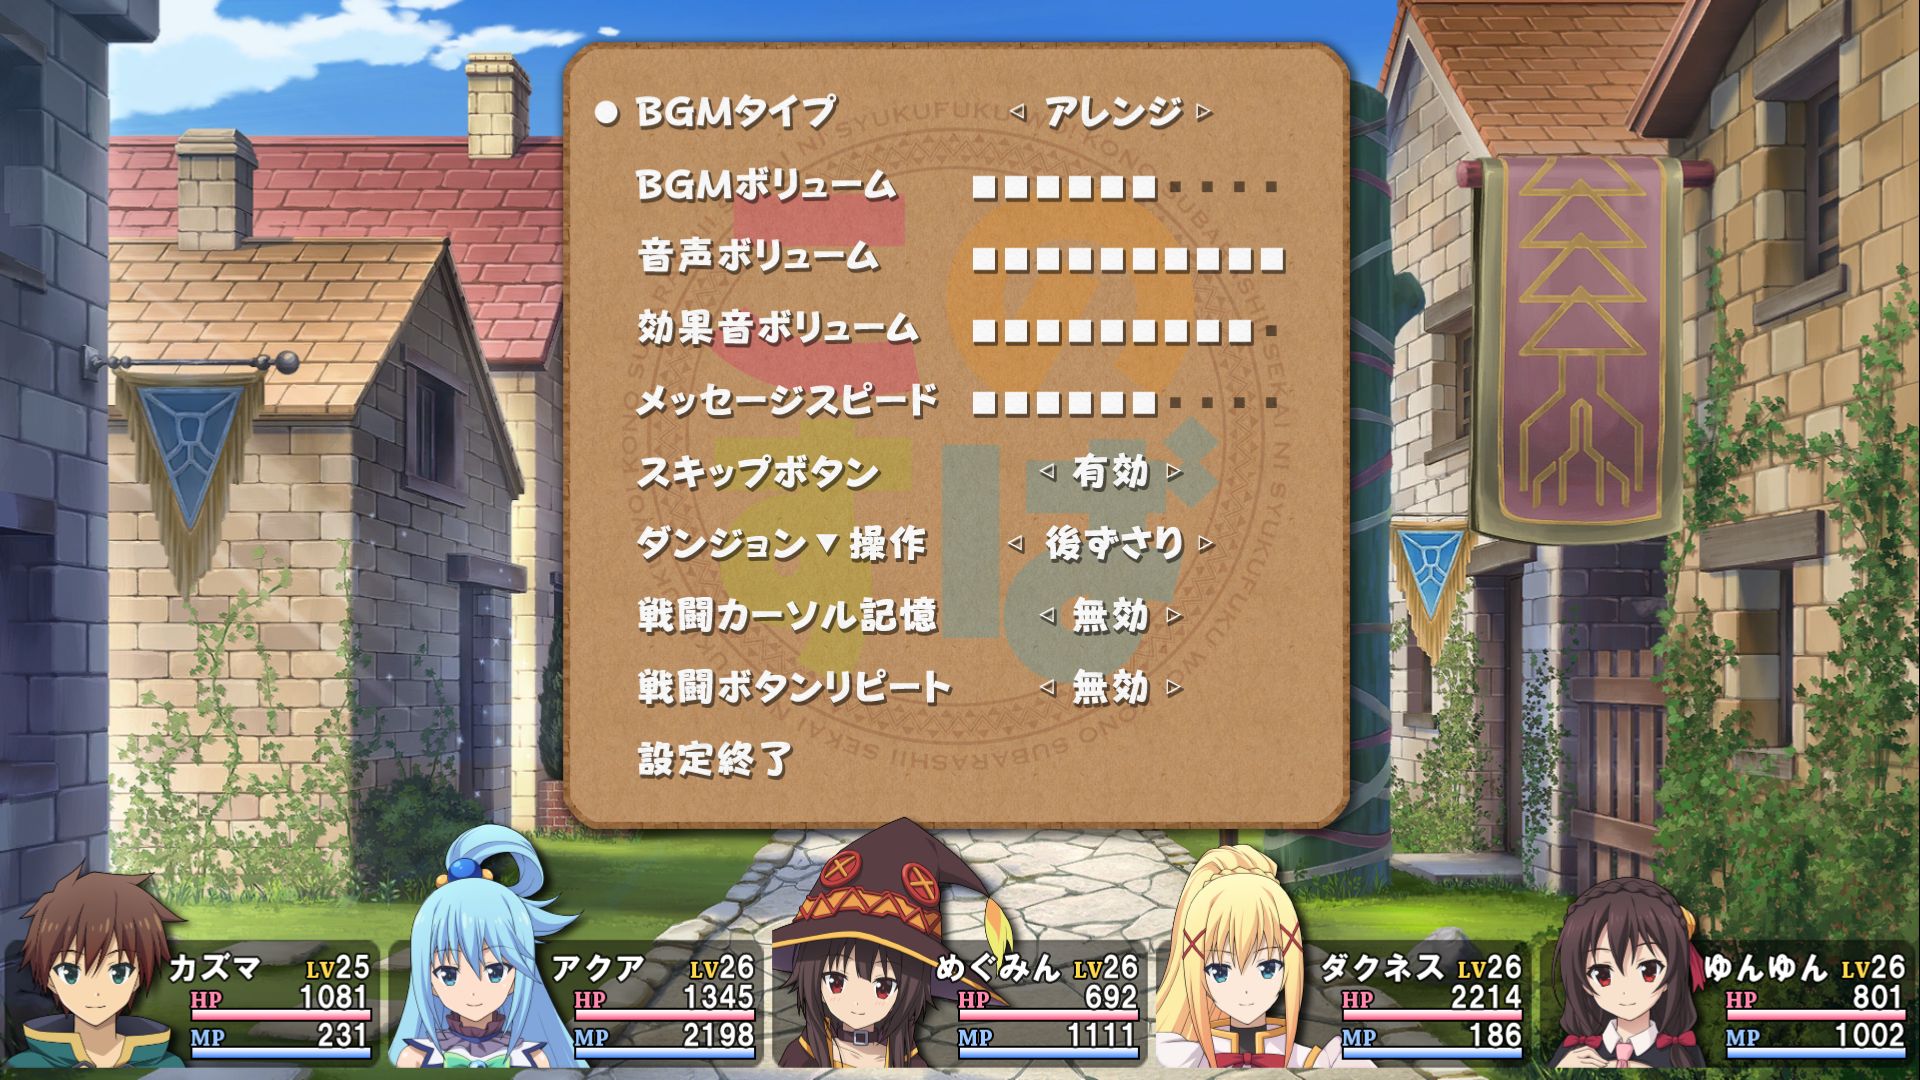 Fantasy Anime Konosuba is Getting a New Dungeon Crawler RPG for PS4 and Vita